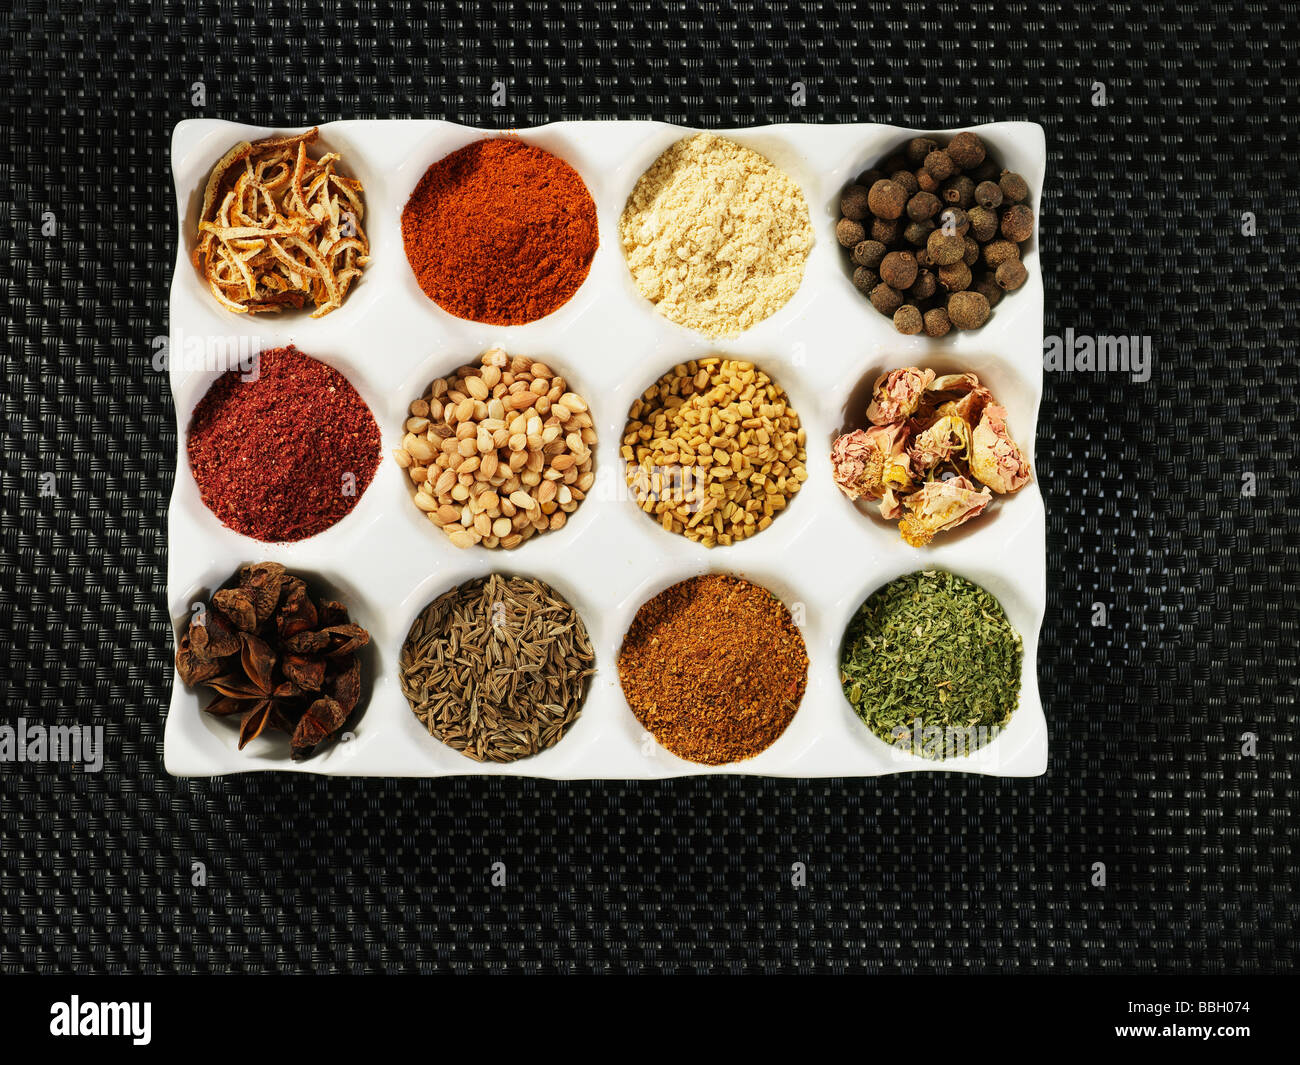 A white pallette of many different spices and seasonings used for cooking shot against a black textured background Stock Photo